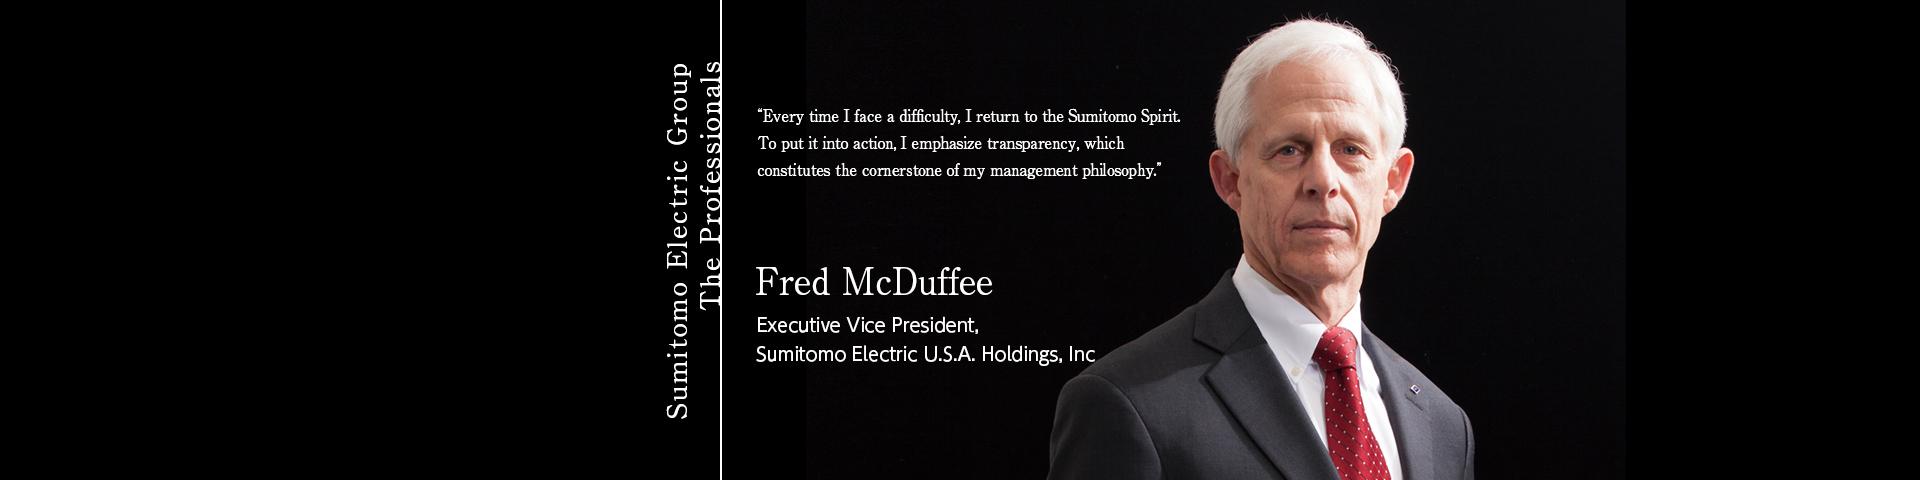 Sumitomo Electric Group The Professionals ~Fred McDuffee Executive Vice President, Sumitomo Electric U.S.A. Holdings, Inc.~